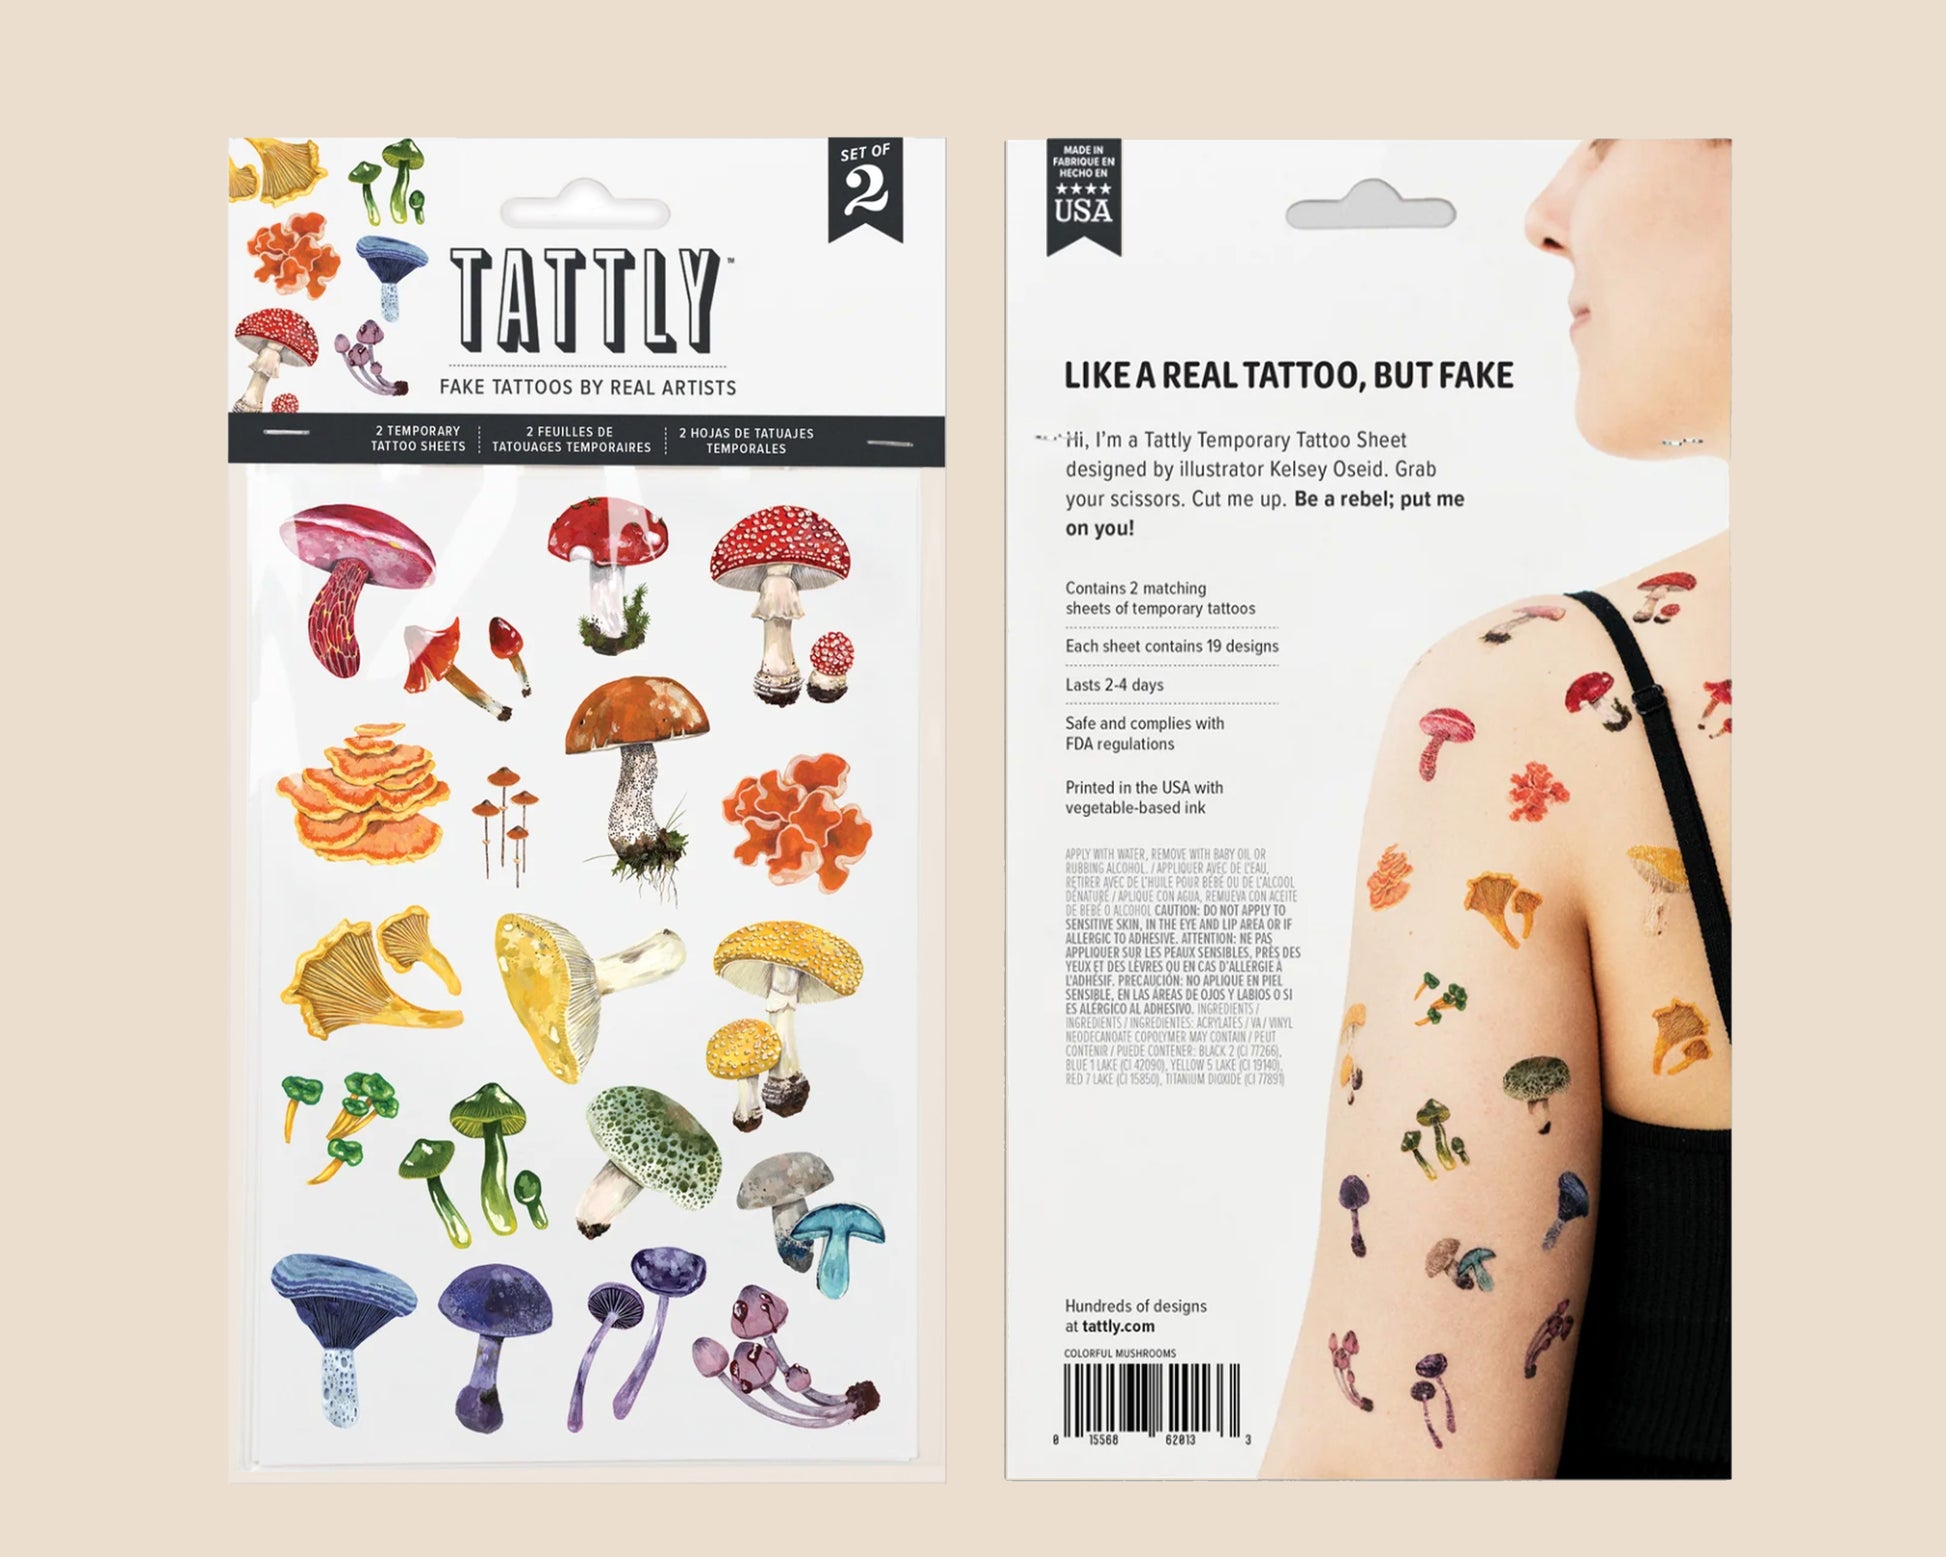 Buy Wholesale Temporary Tattoo Paper For Temporary Tattoos And